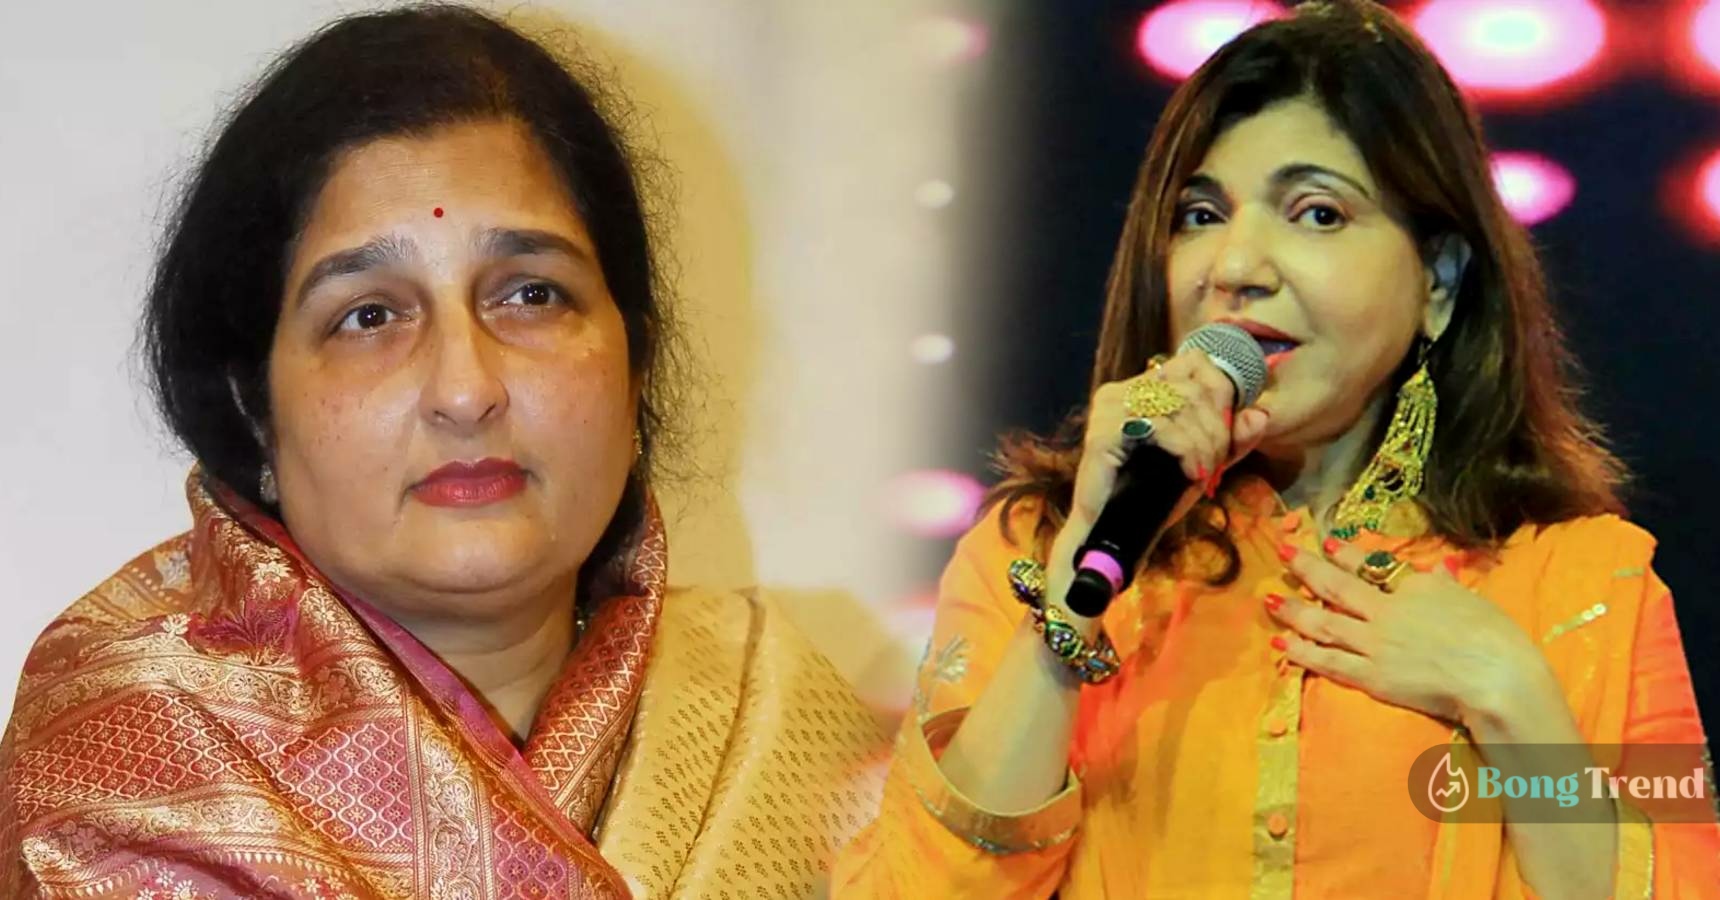 When Alka Yagnik blamed Anuradha Paudwal for taking songs from her